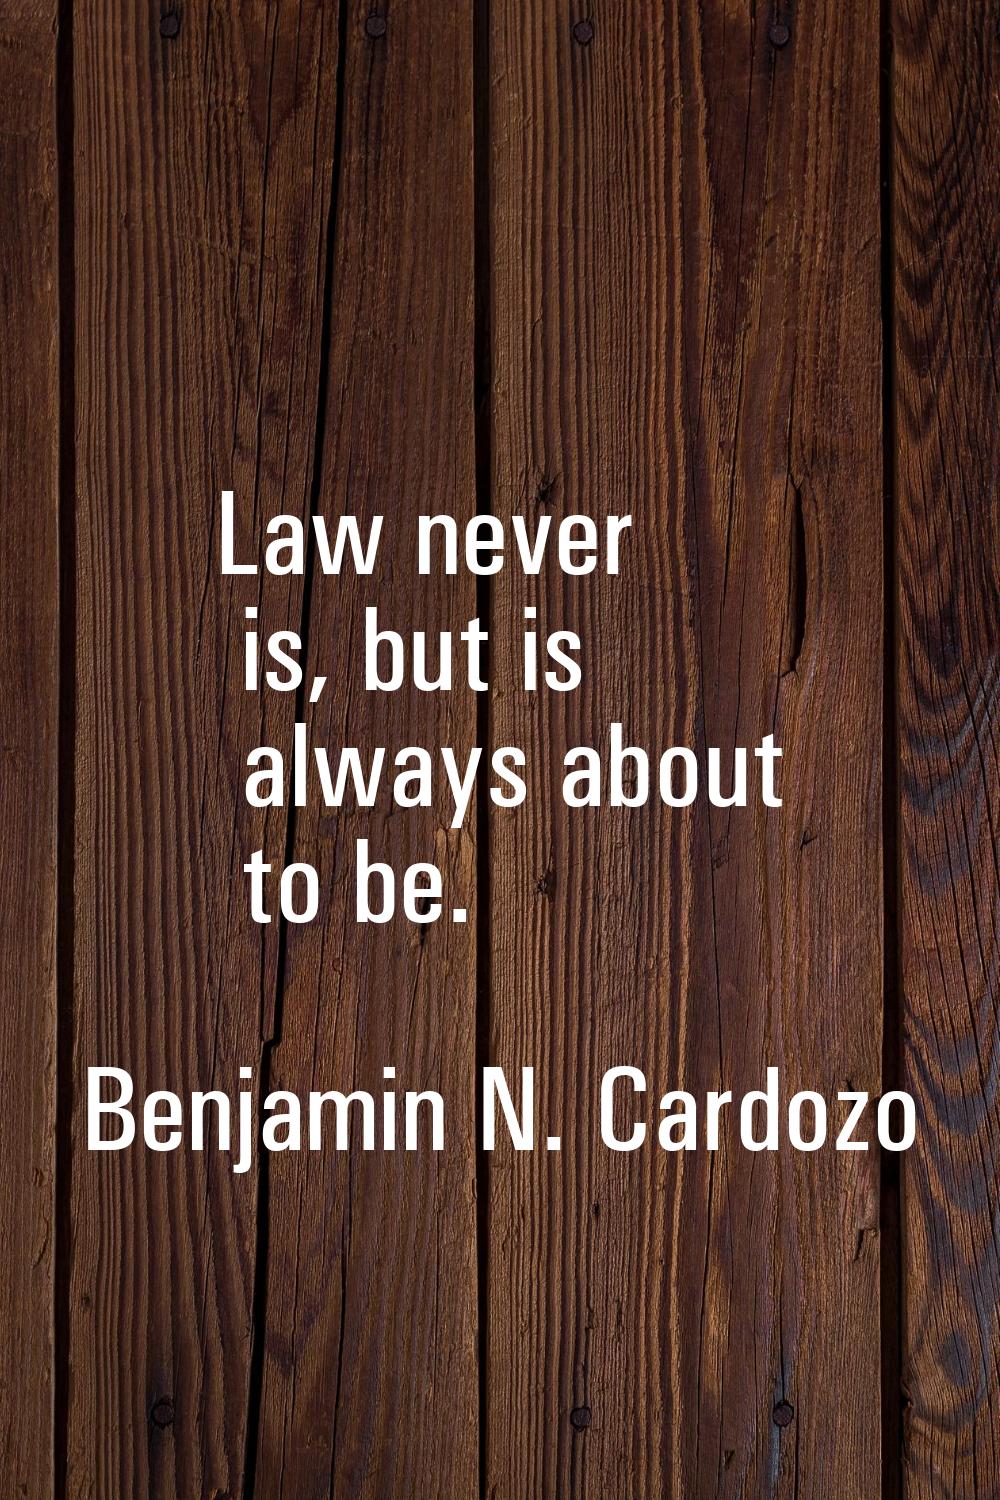 Law never is, but is always about to be.